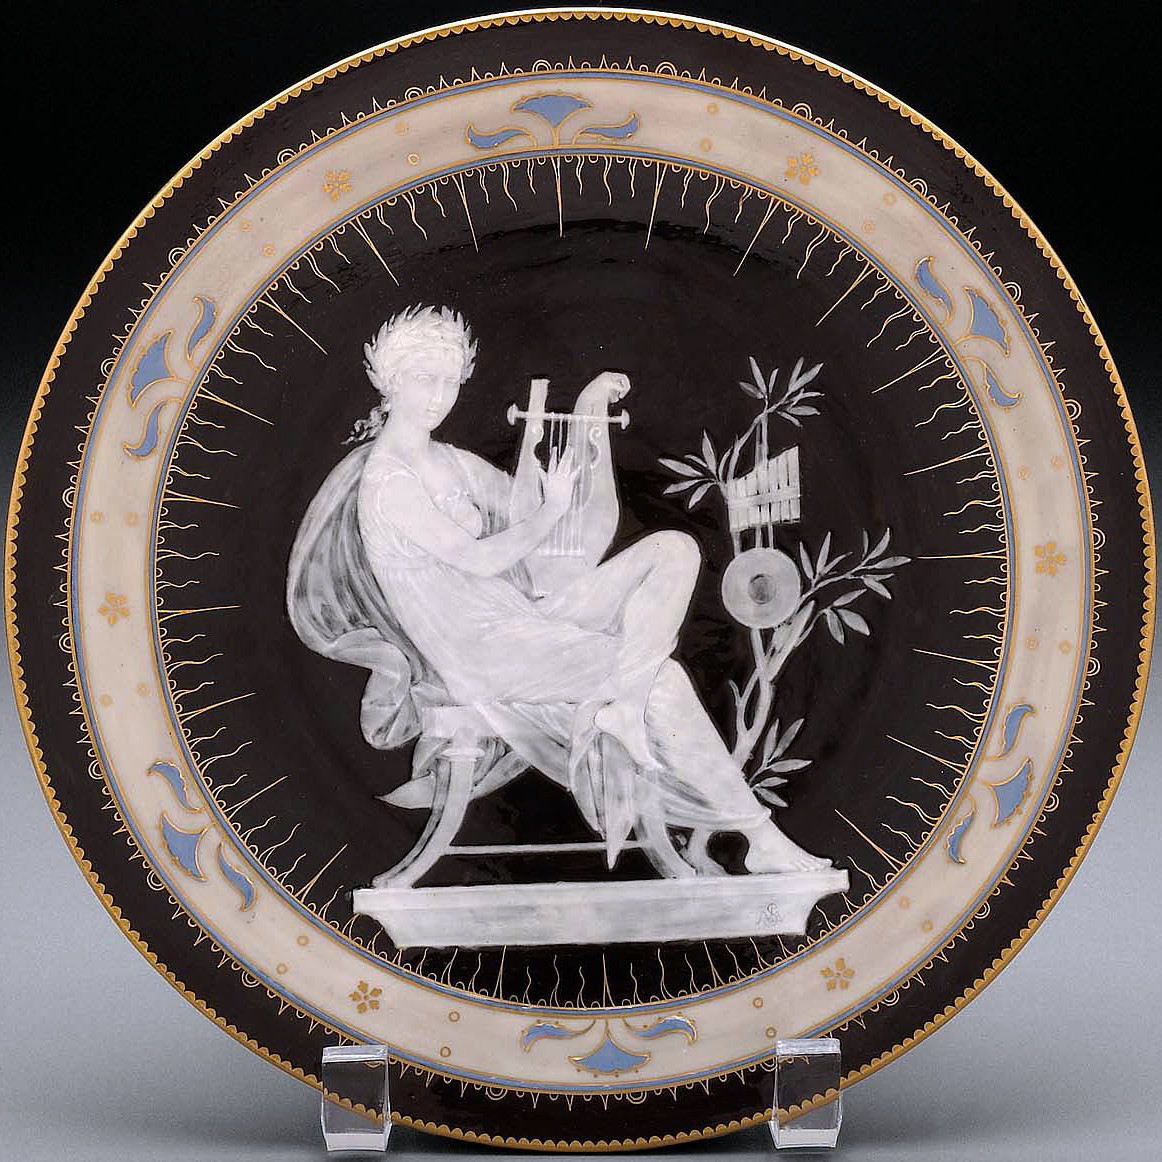 Minton pate-sur-pate plate signed Solon depicting a young woman playing the harp